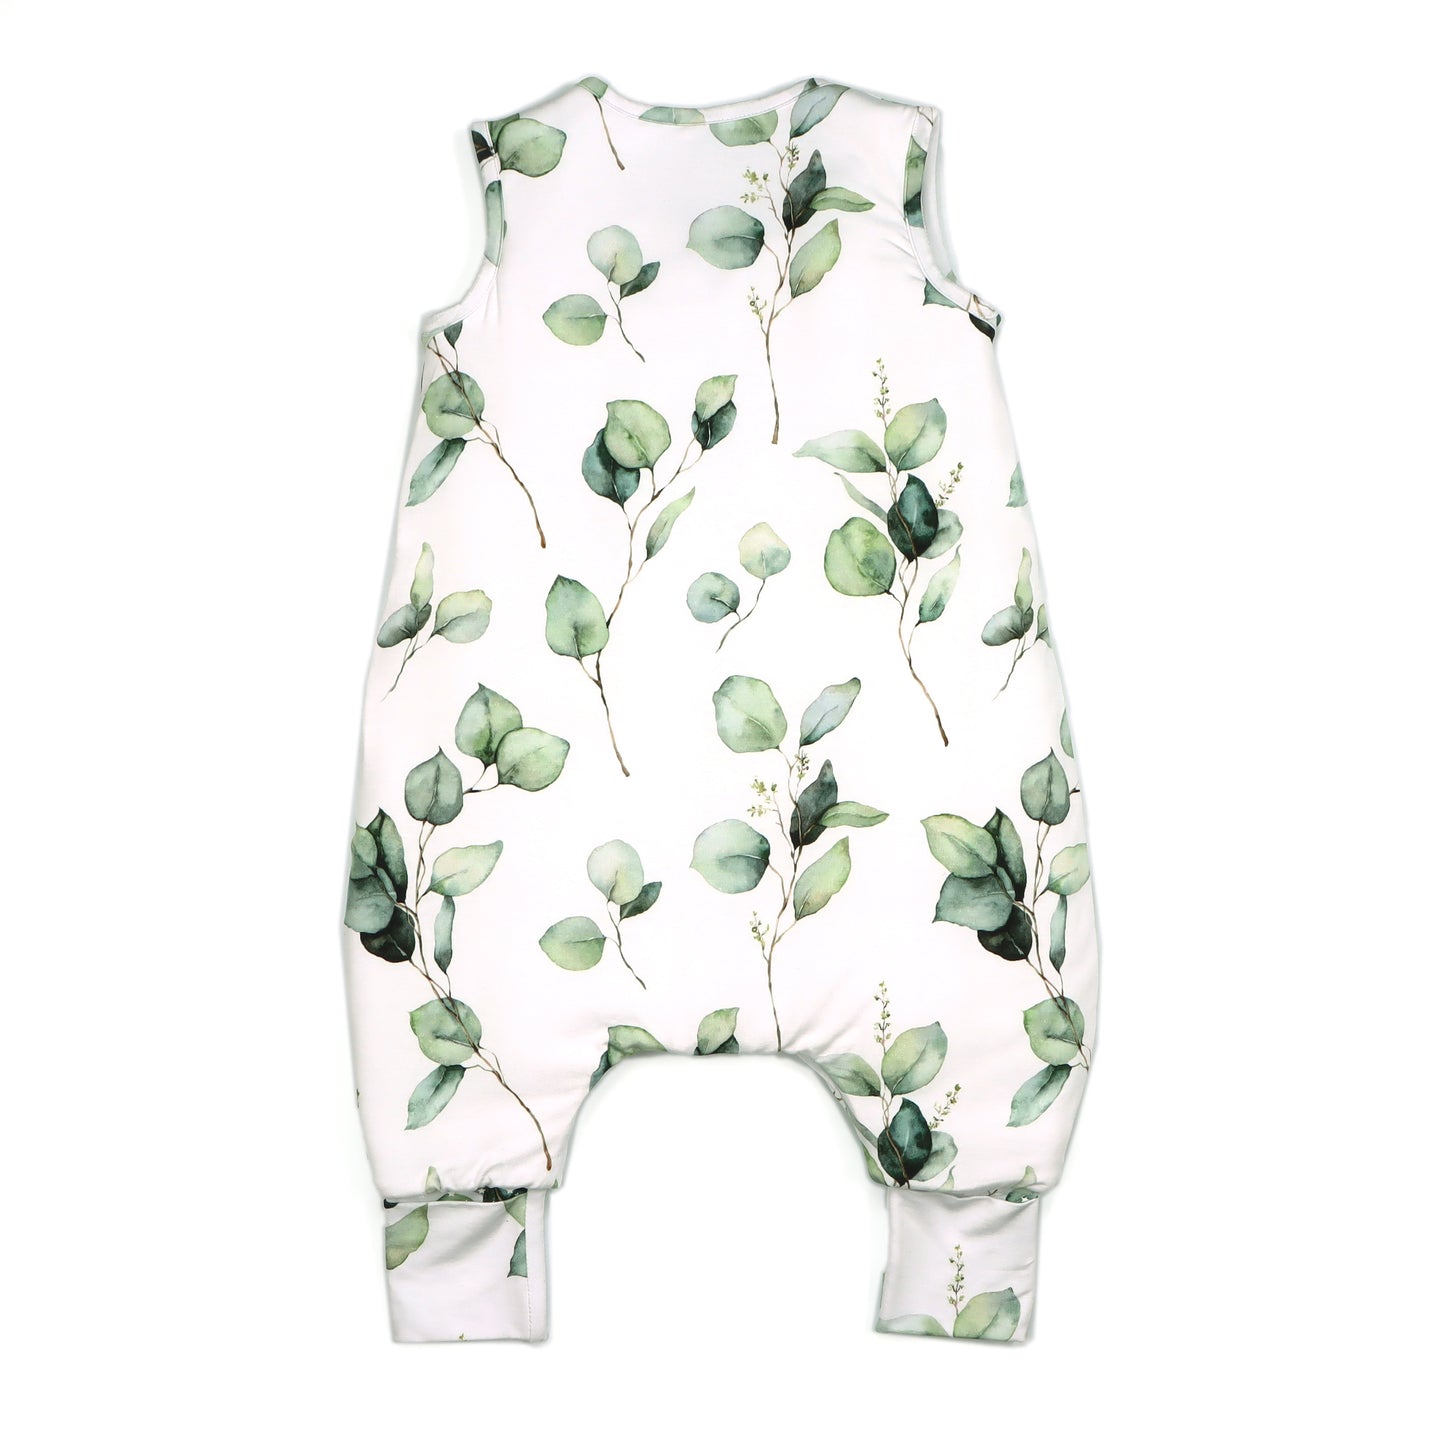 Nyte Nyte 1.0 TOG Green Bloom | Limited Edition